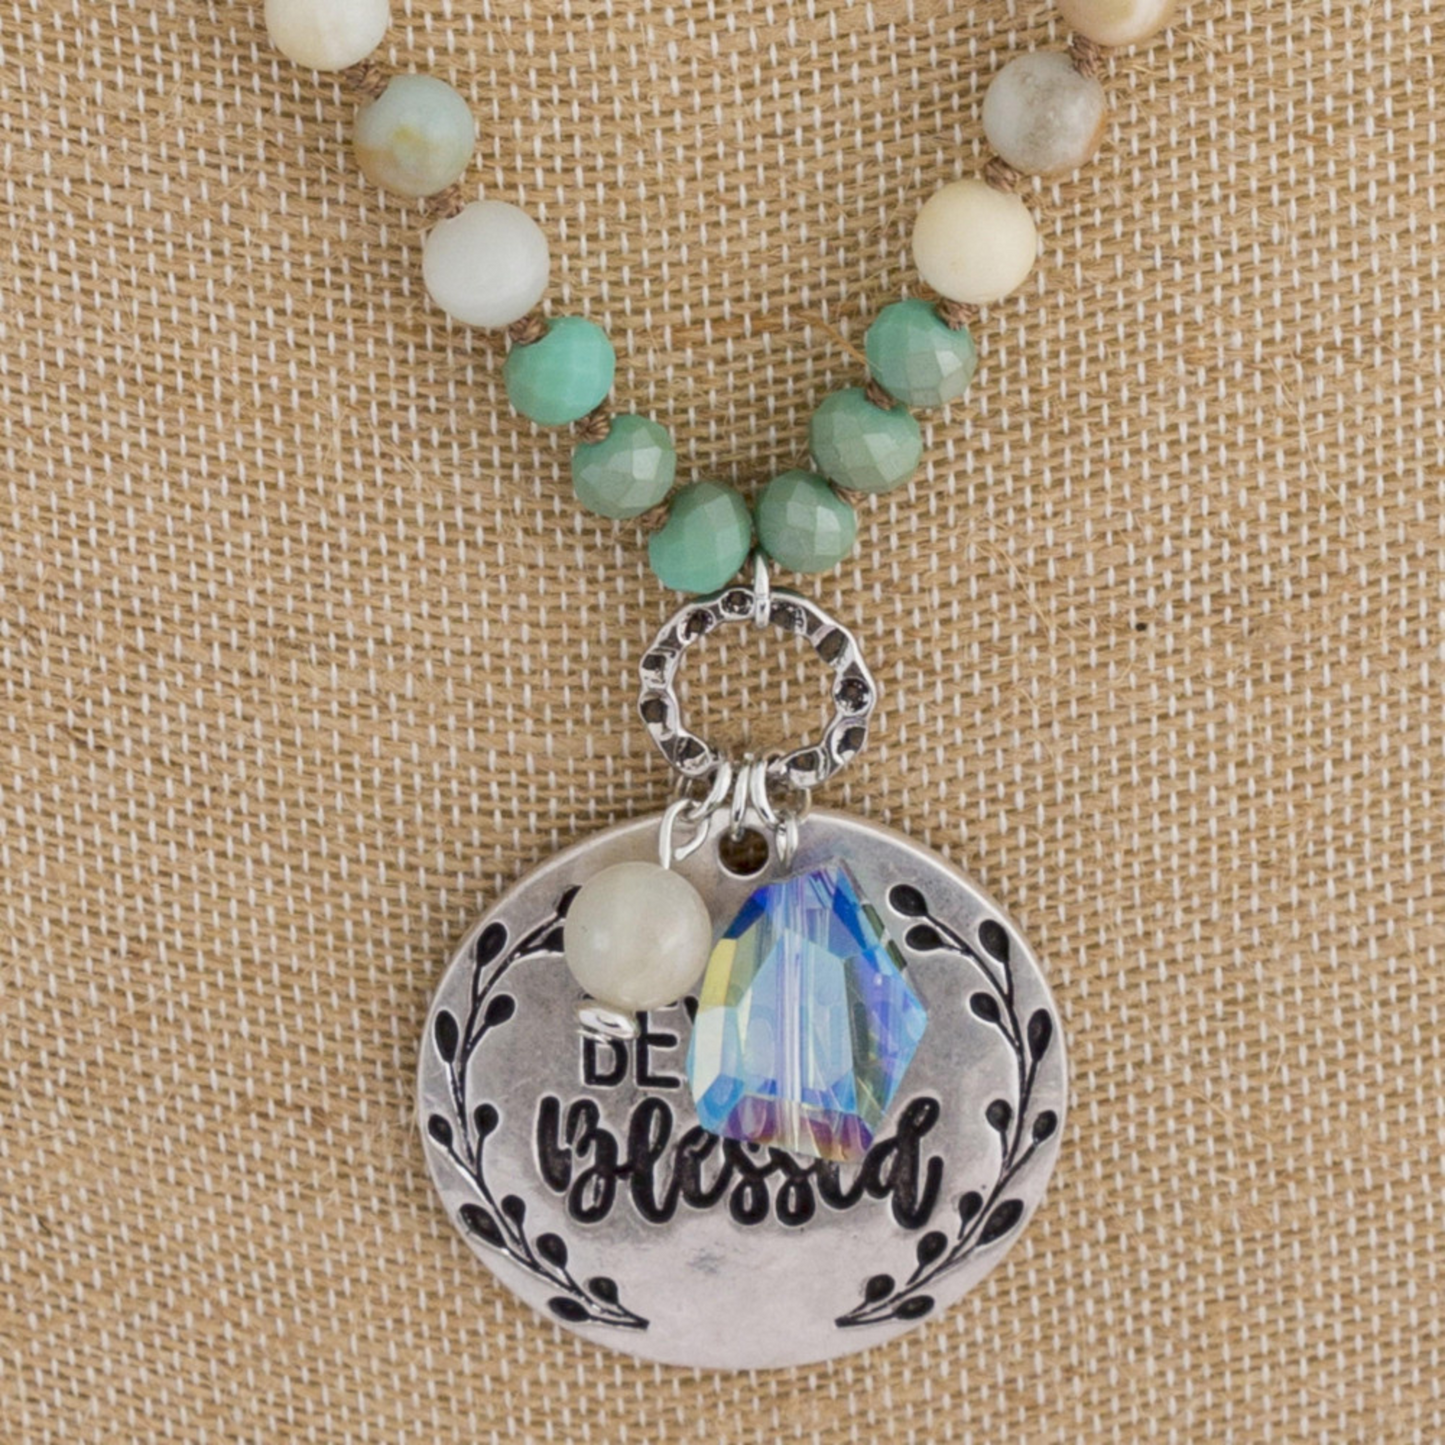 Beautiful Long Beaded Necklace with message, "Beyond Blessed"